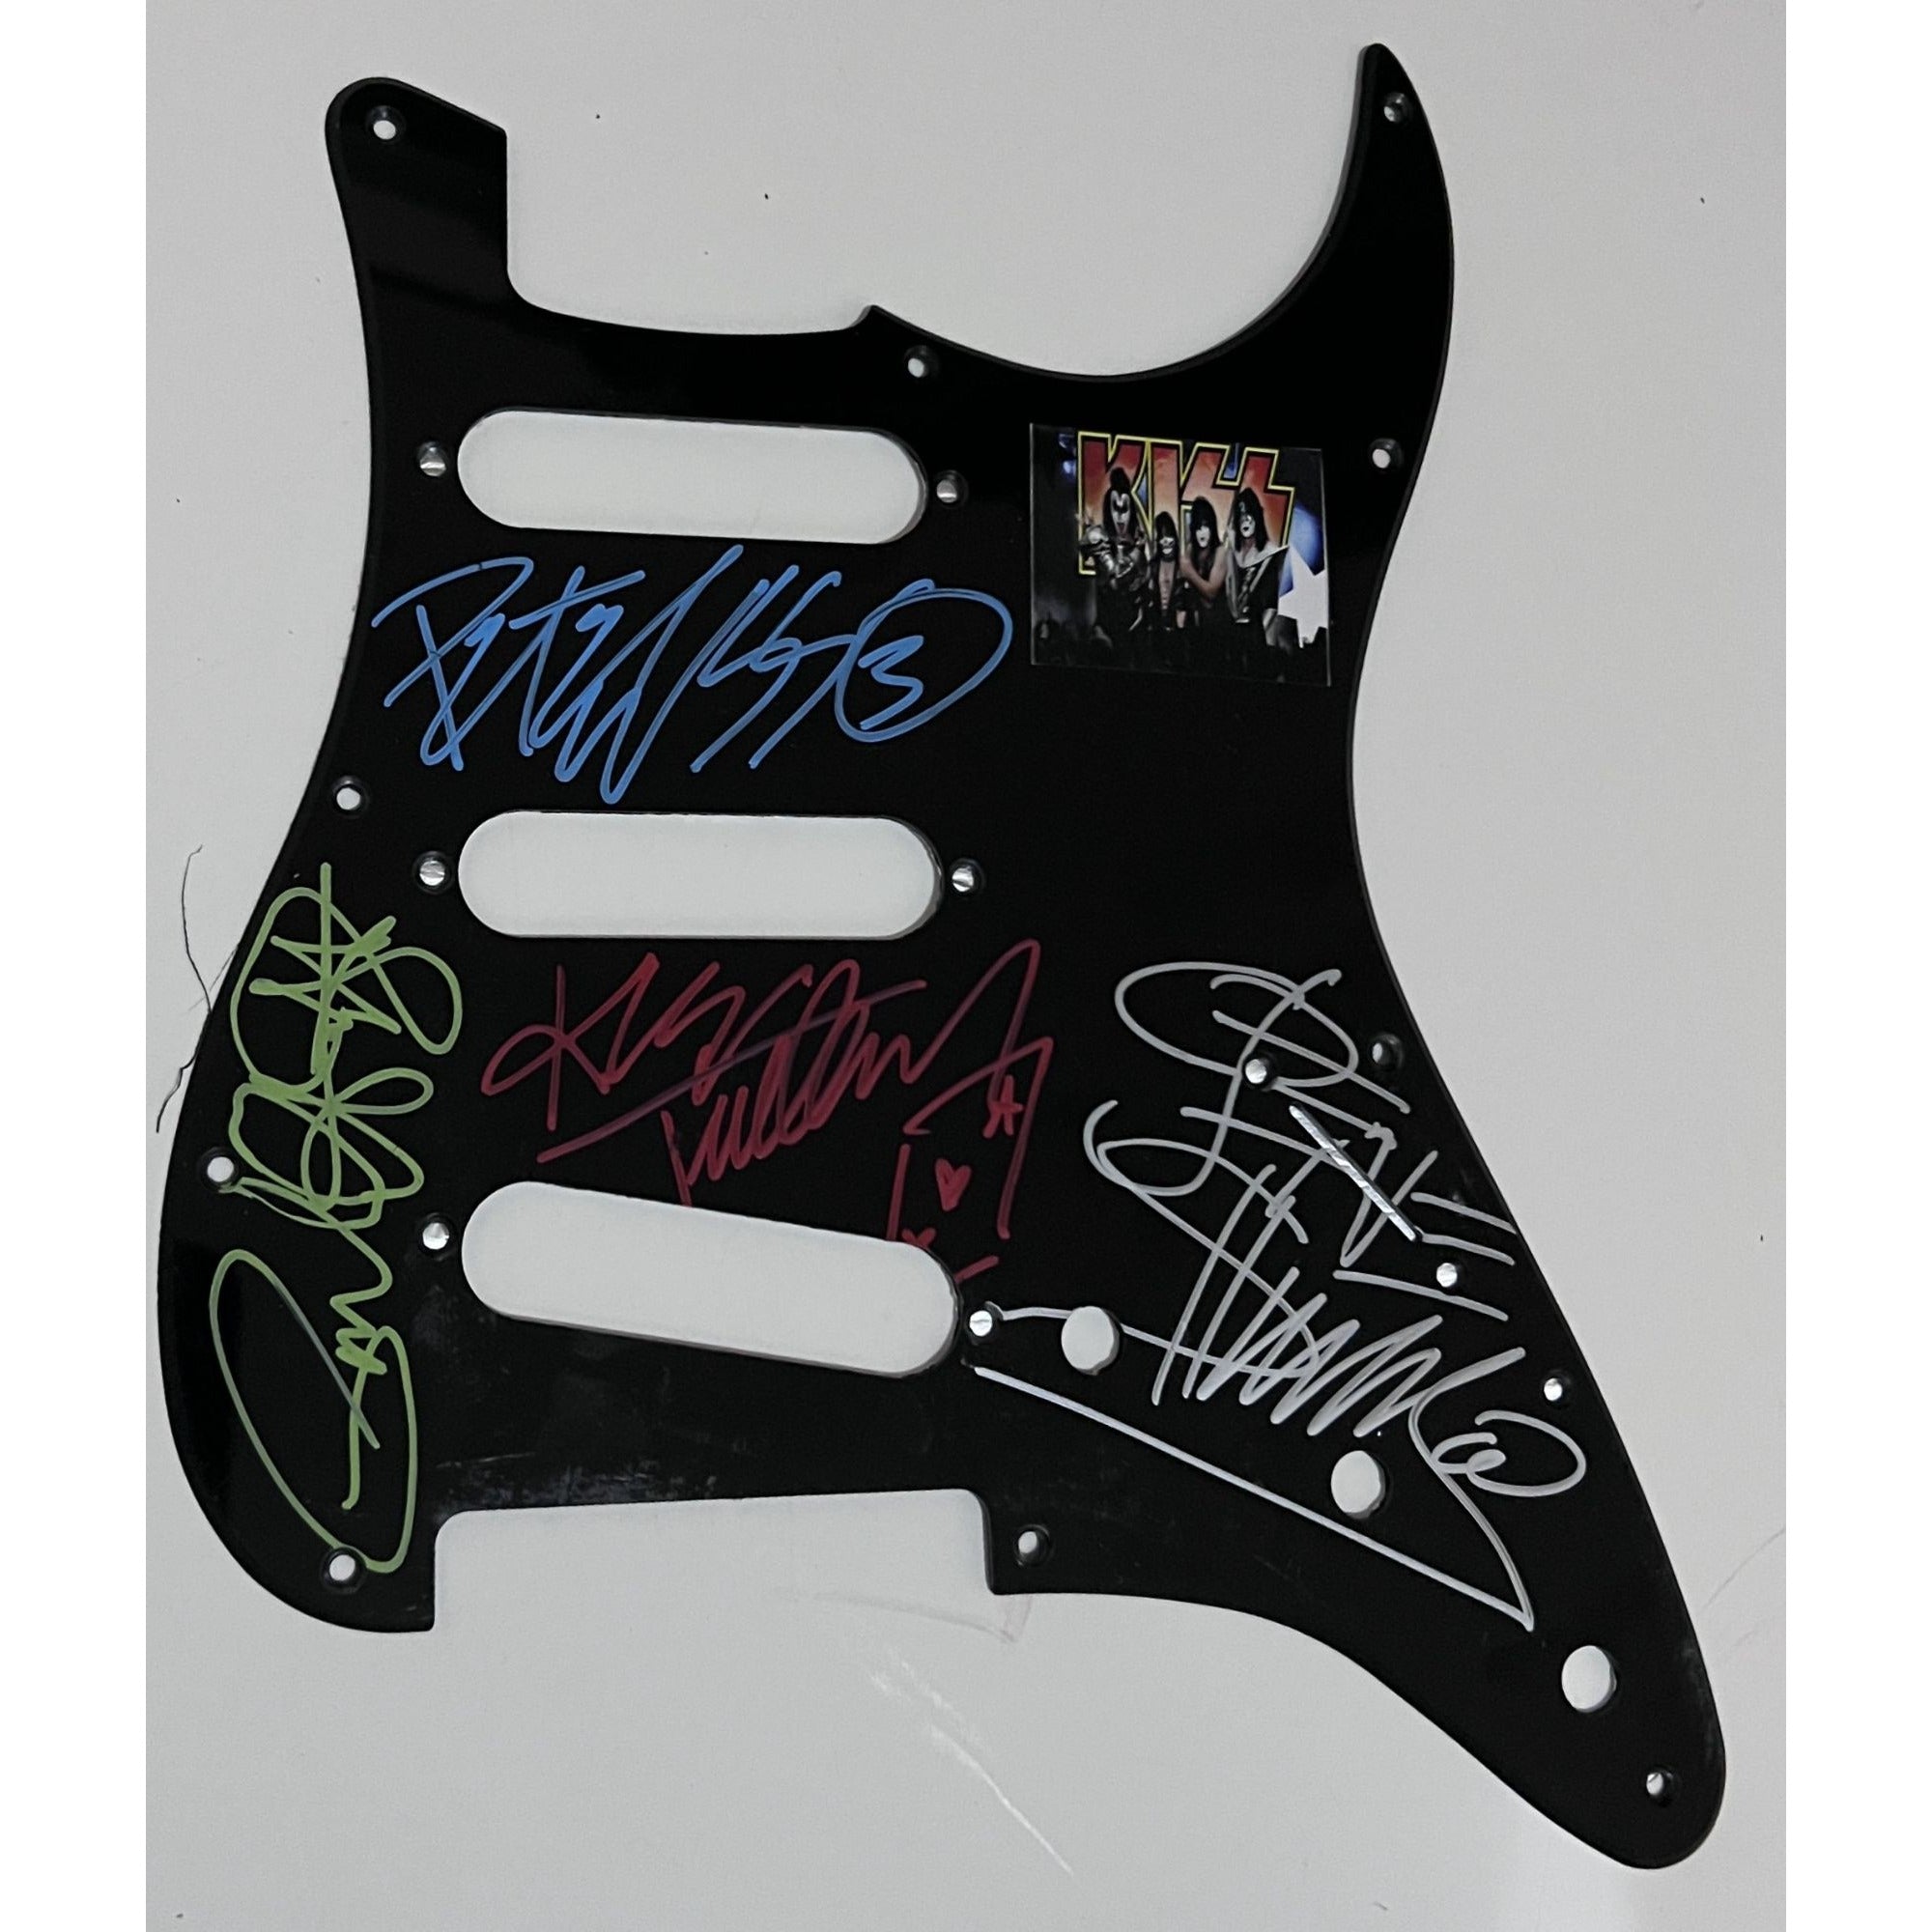 Kiss Gene Simmons Paul Stanley Peter Criss Ace Frehley   Stratocaster electric pickguard signed with proof